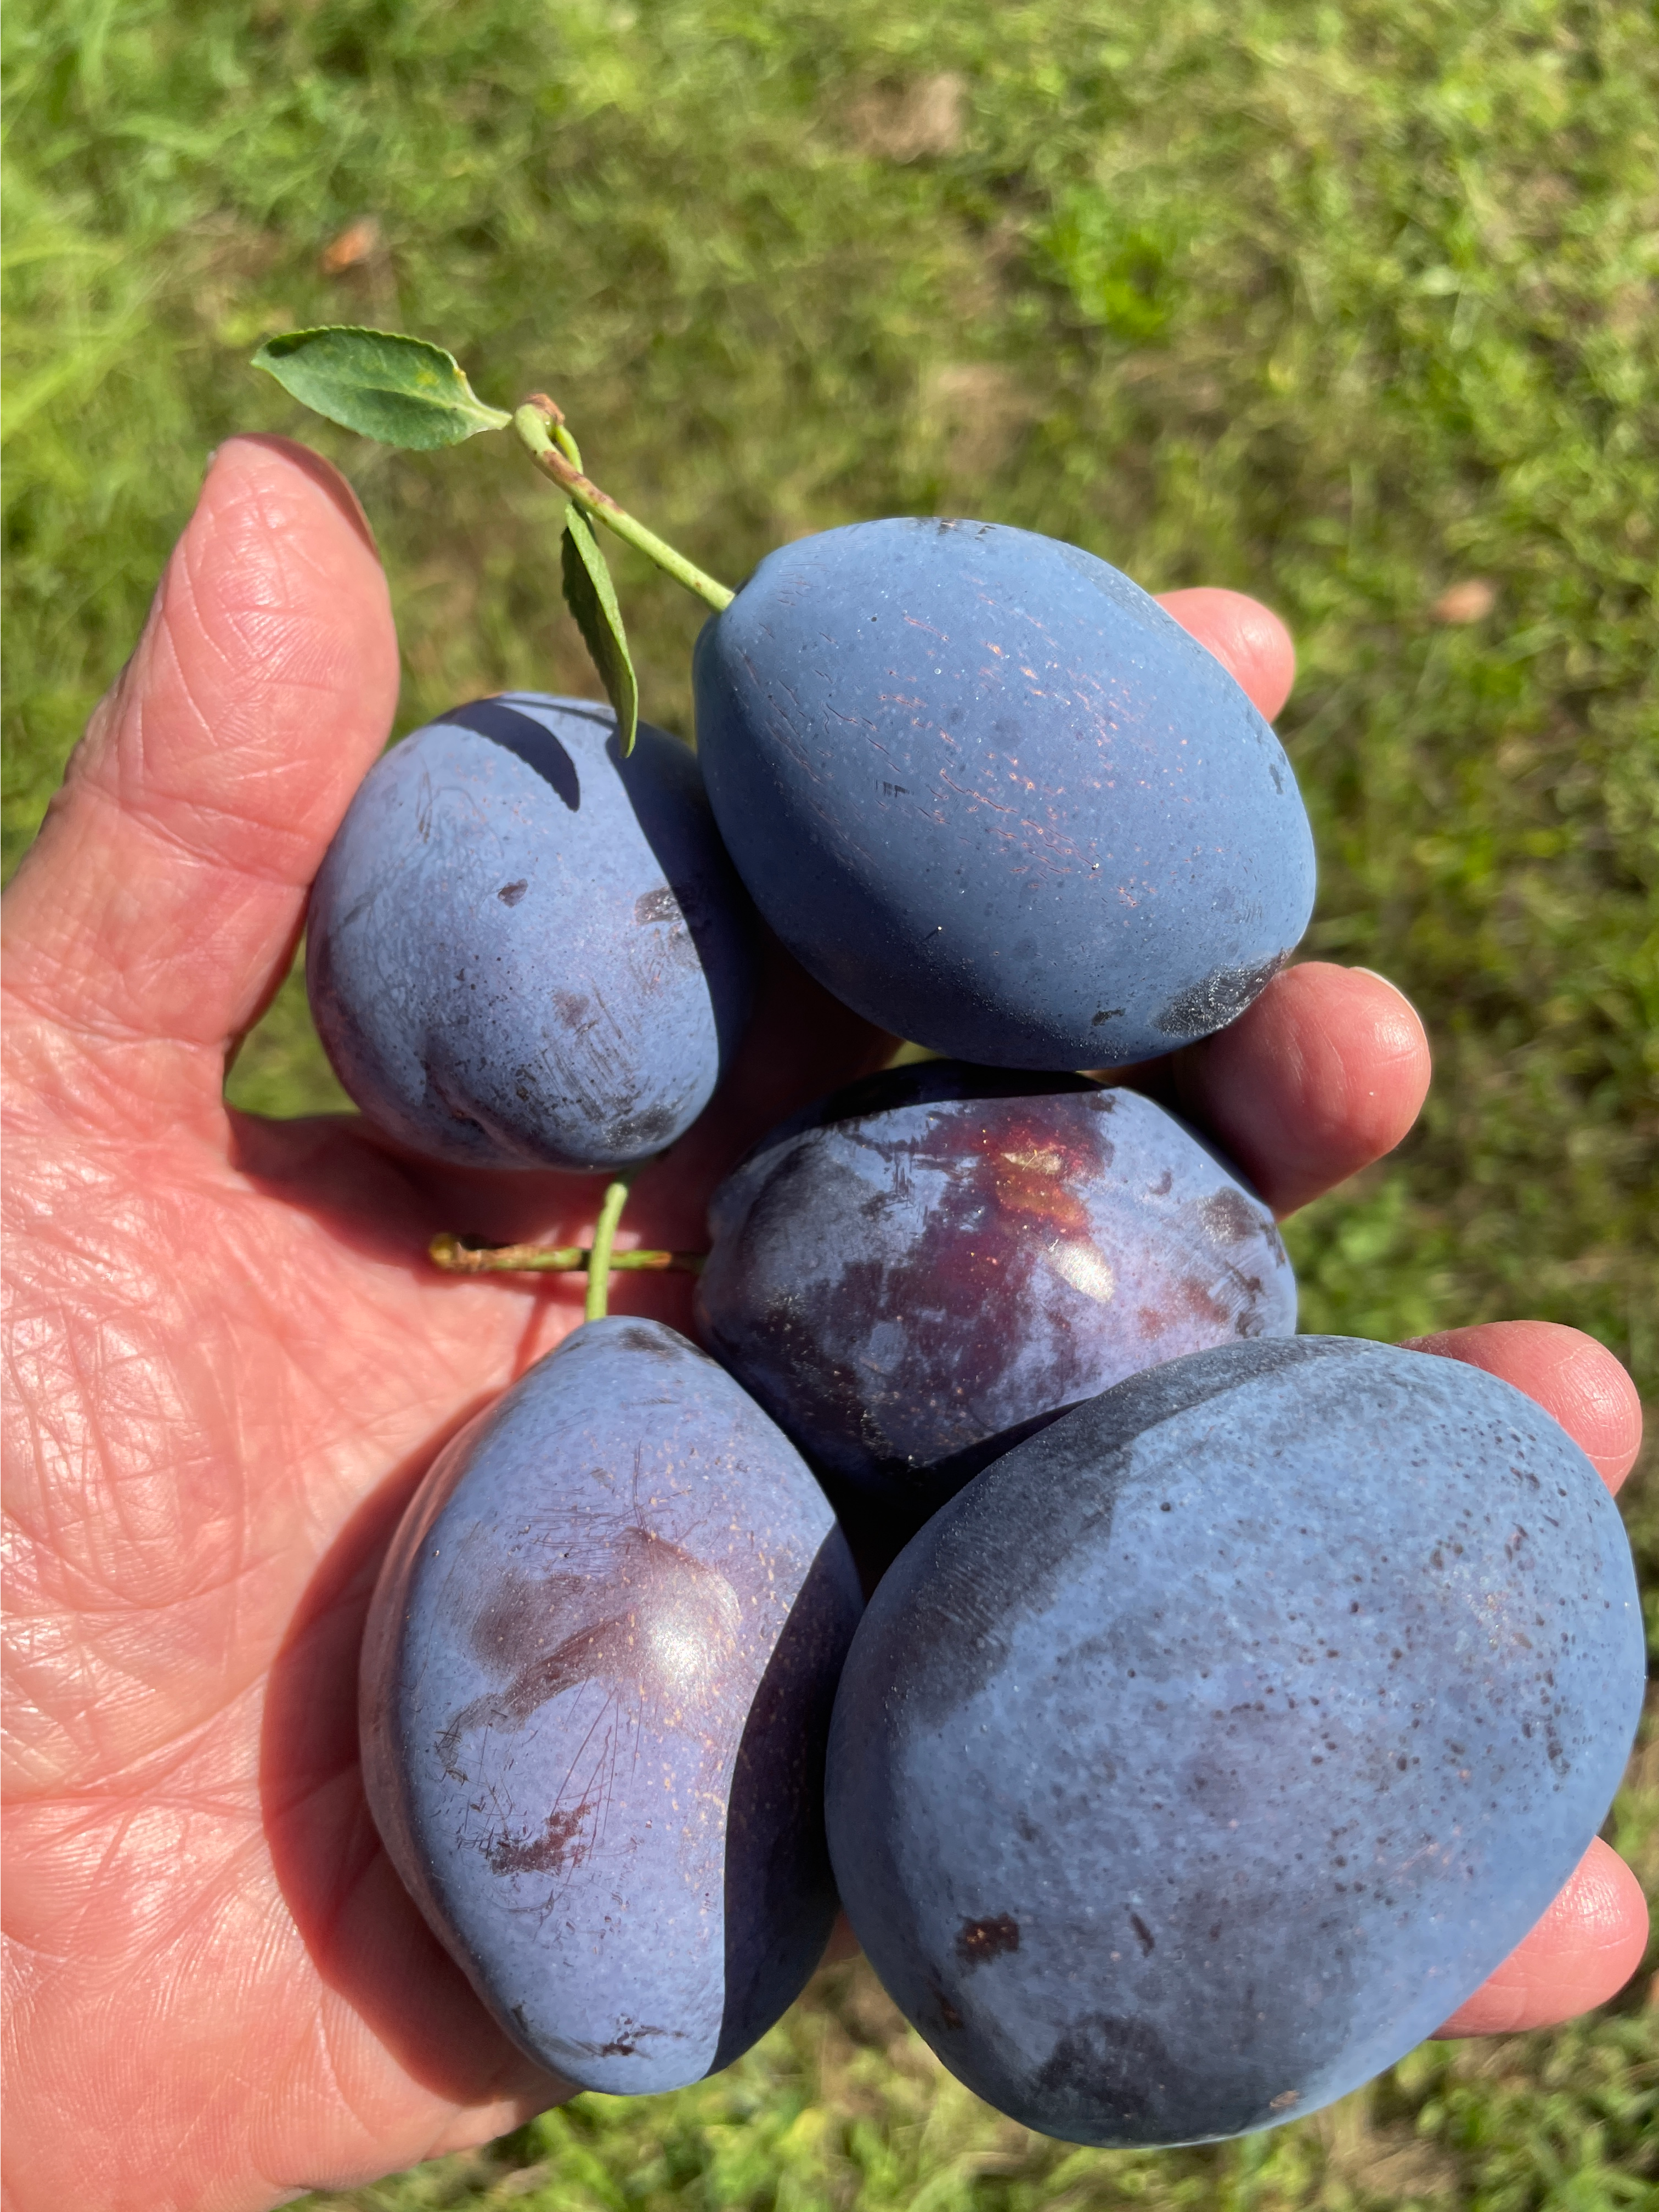 A hand holding several harvested Stanley plums.